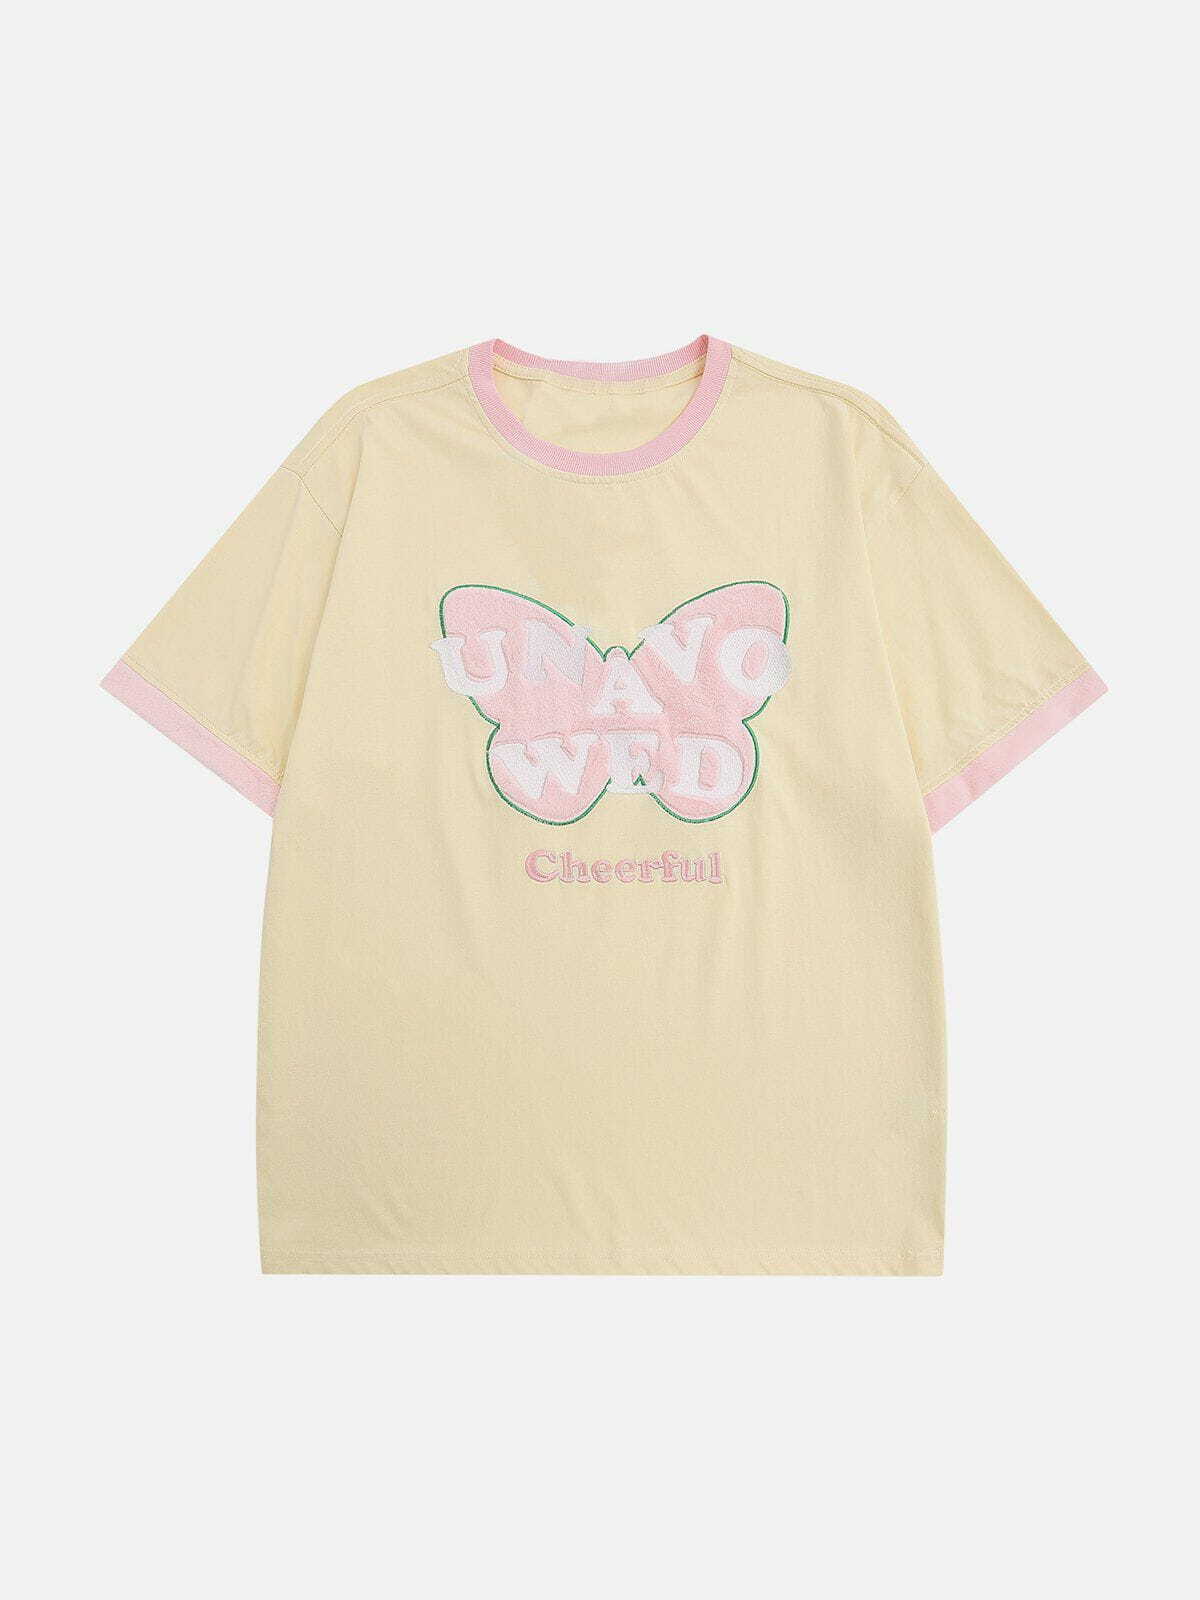 youthful butterfly embroidered tee edgy  retro streetwear essential 1528